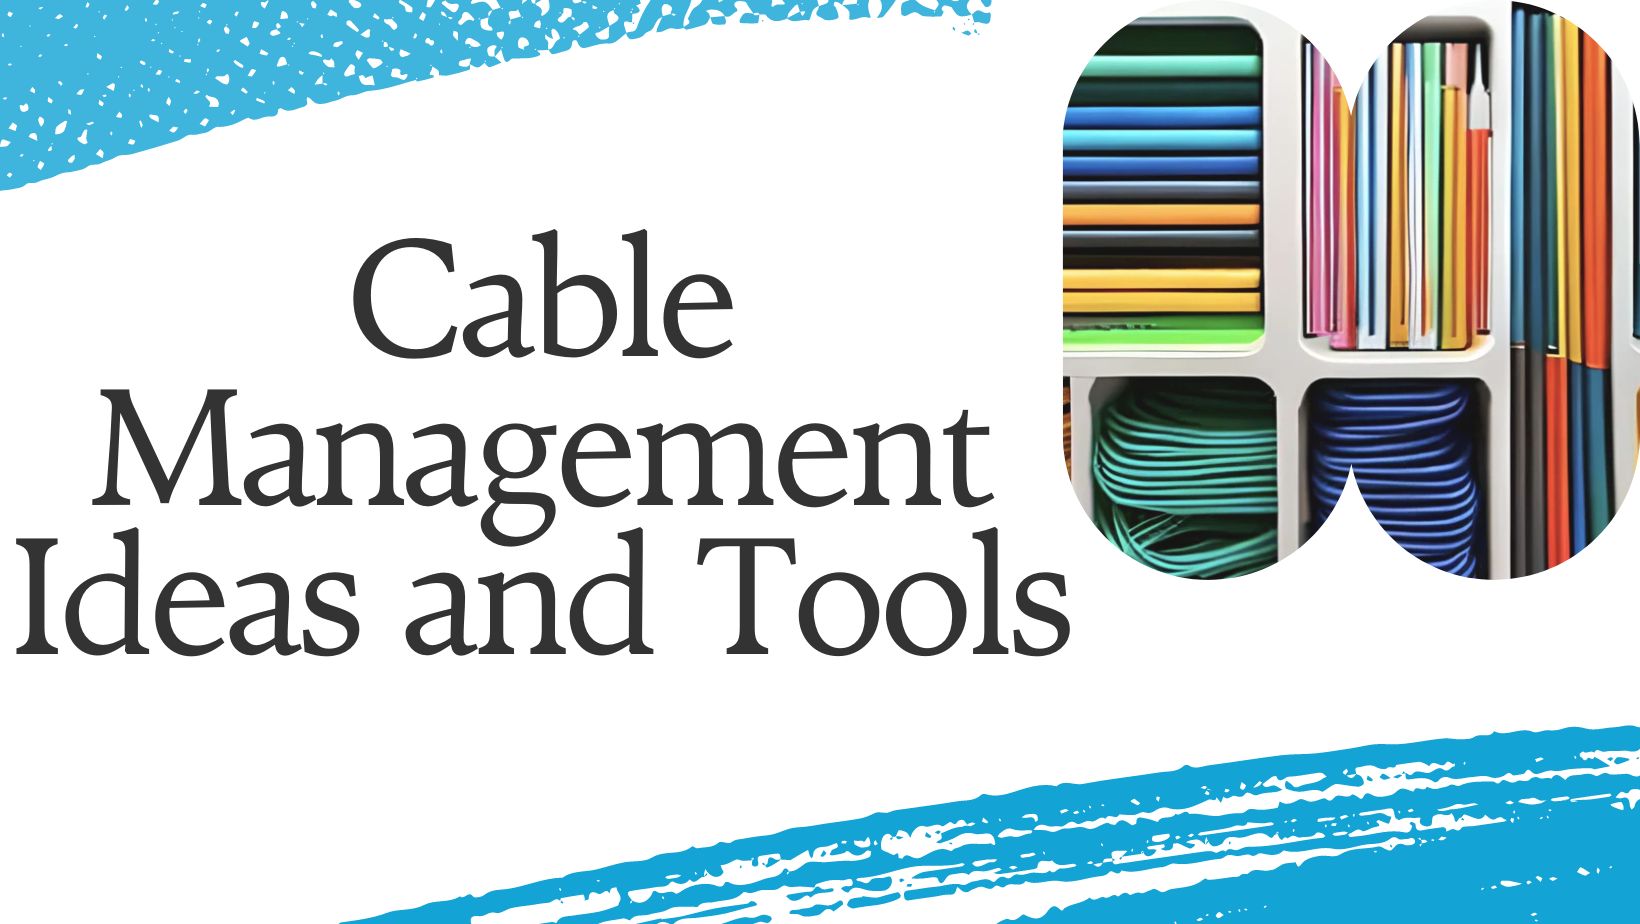 Cable Management Ideas: 21 Organizational Tools & Tips